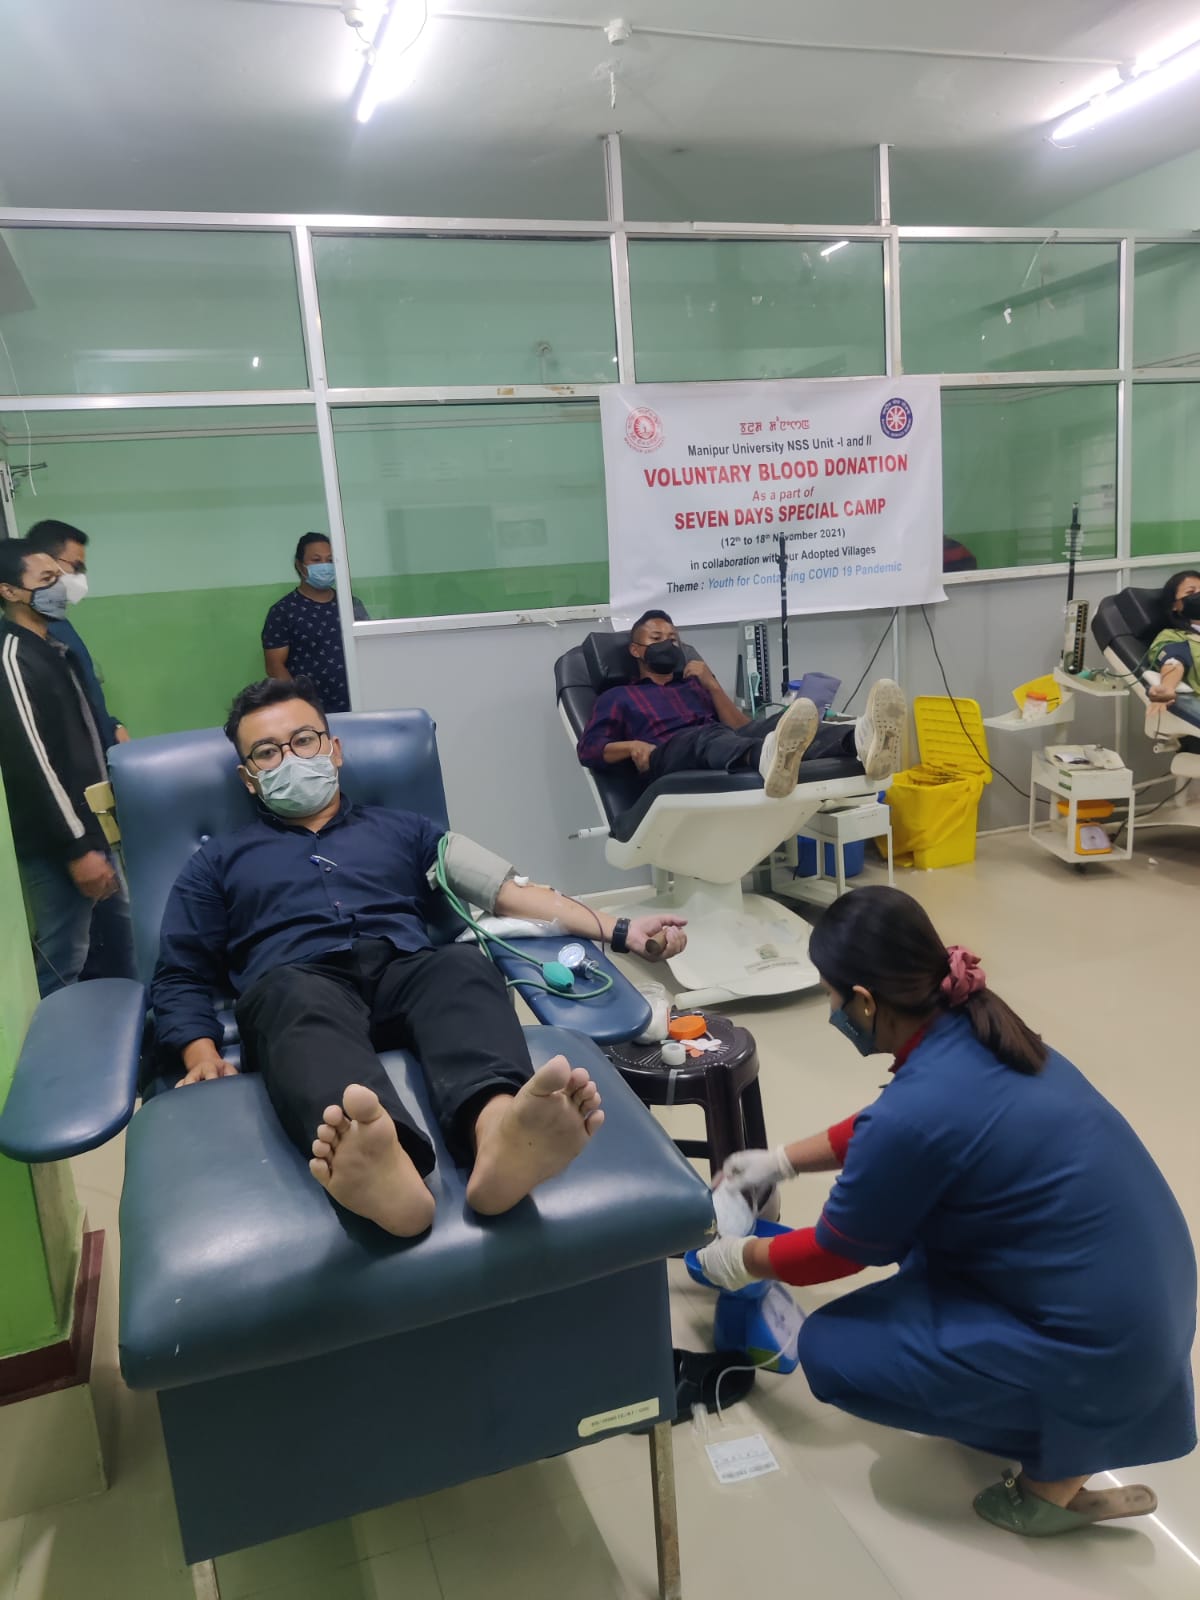 MU NSS Unit I and II organizes one-day Voluntary Blood Donation as a part of Seven Days Special Camp at JNIMS 15/11/2021